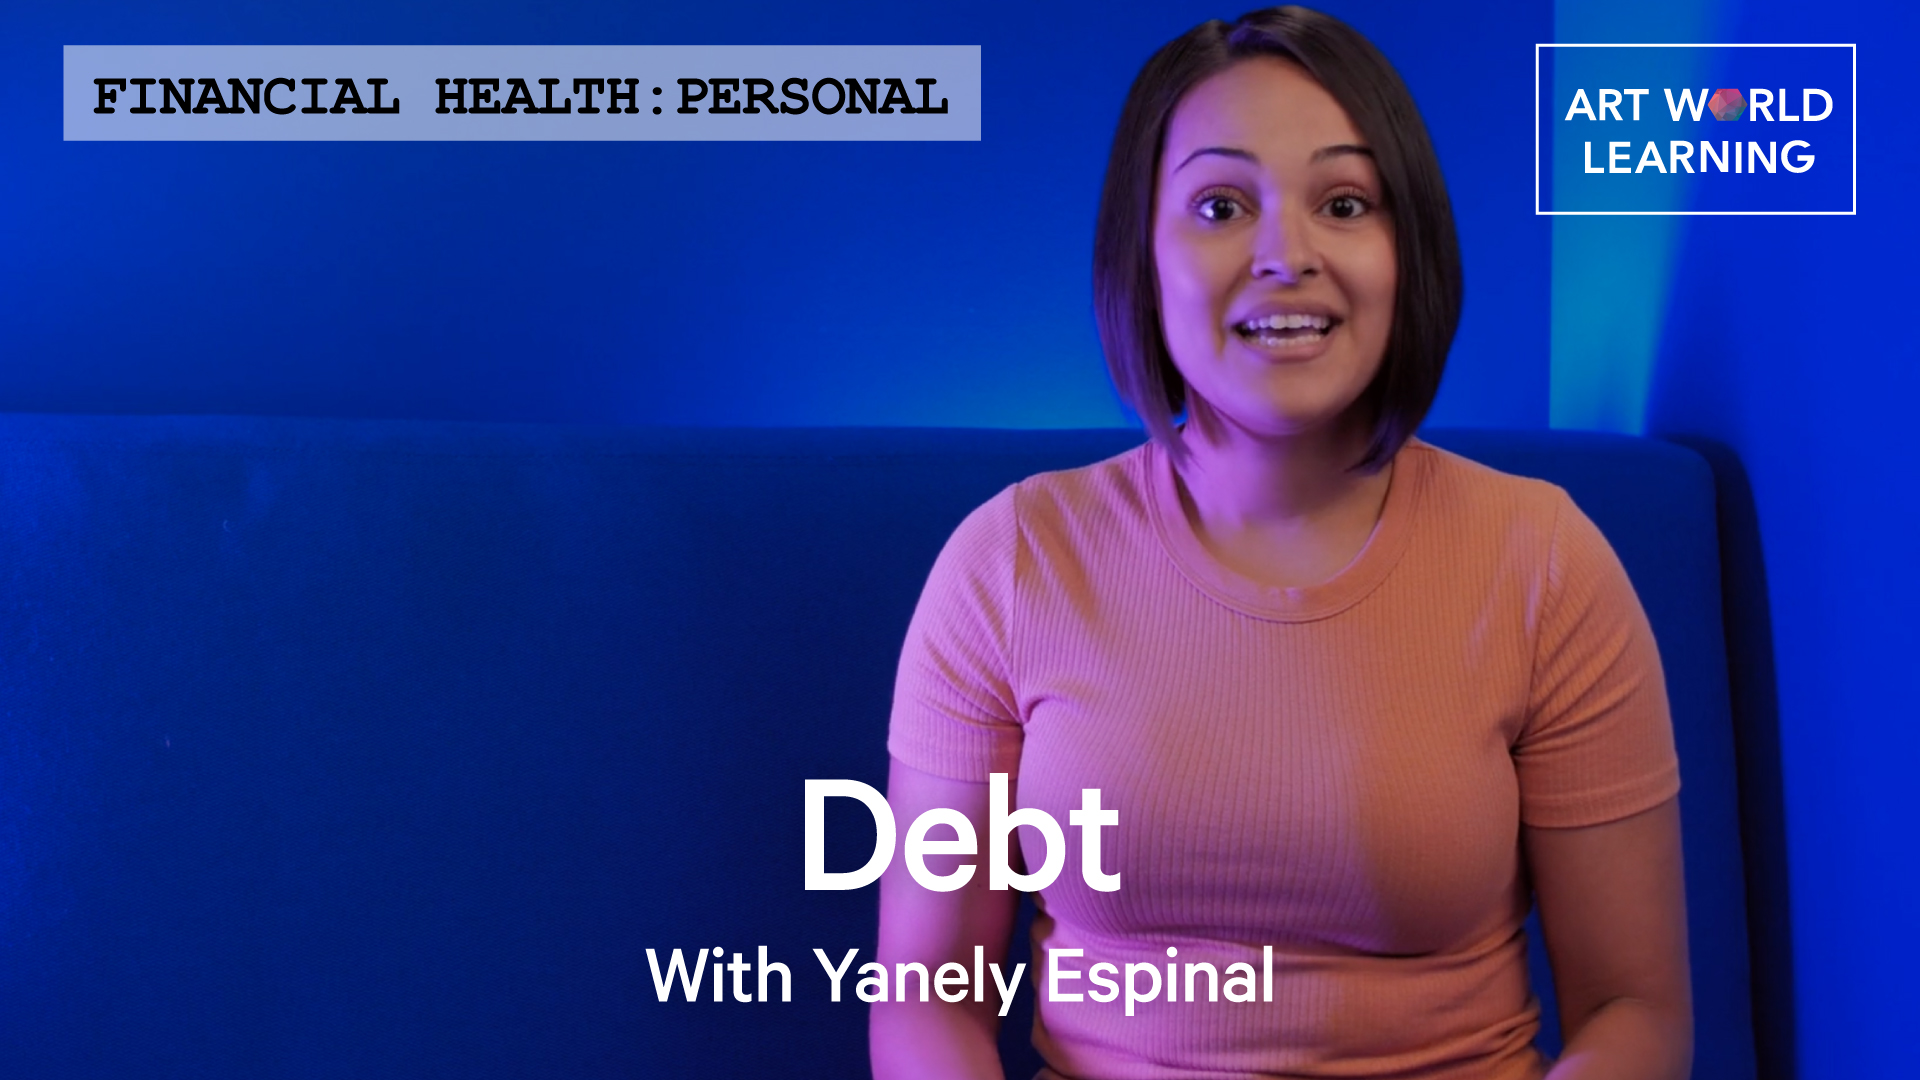 Words Financial Health: Business, Debt With Yanely Espinal over a picture of Yanely Espinal sitting in a blue booth with blue walls.